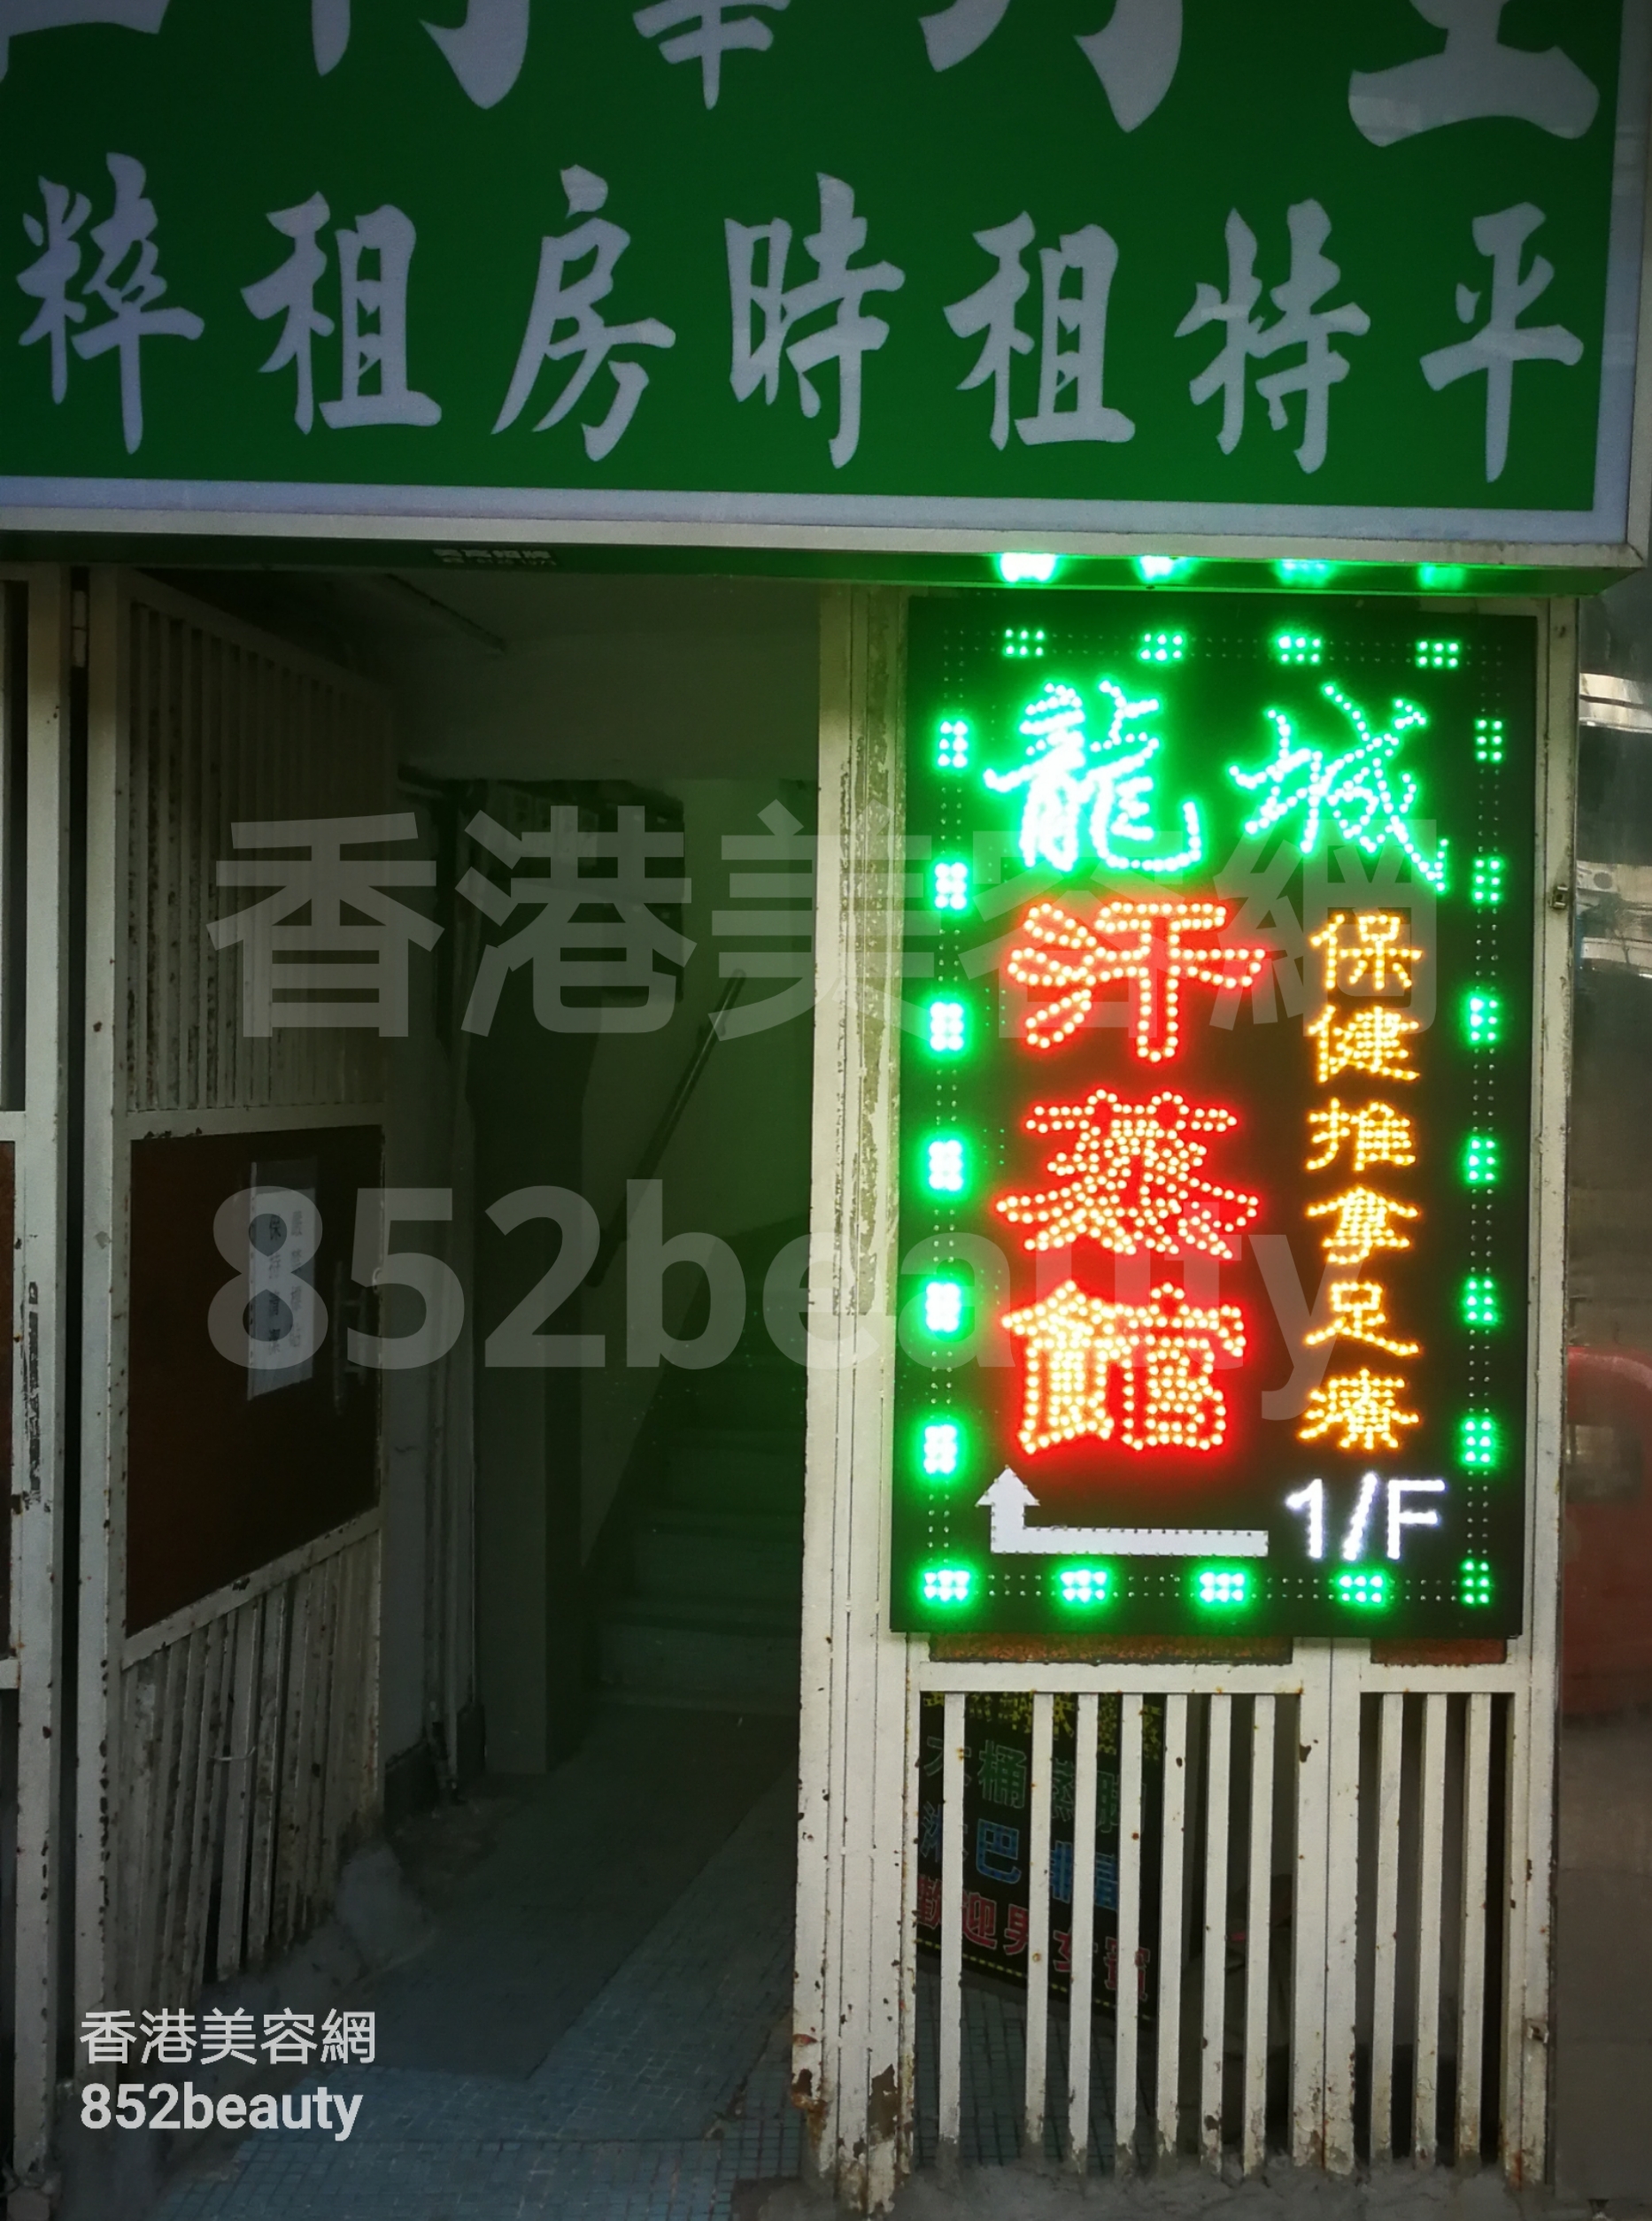 Hand and foot care: 龍城汗蒸館